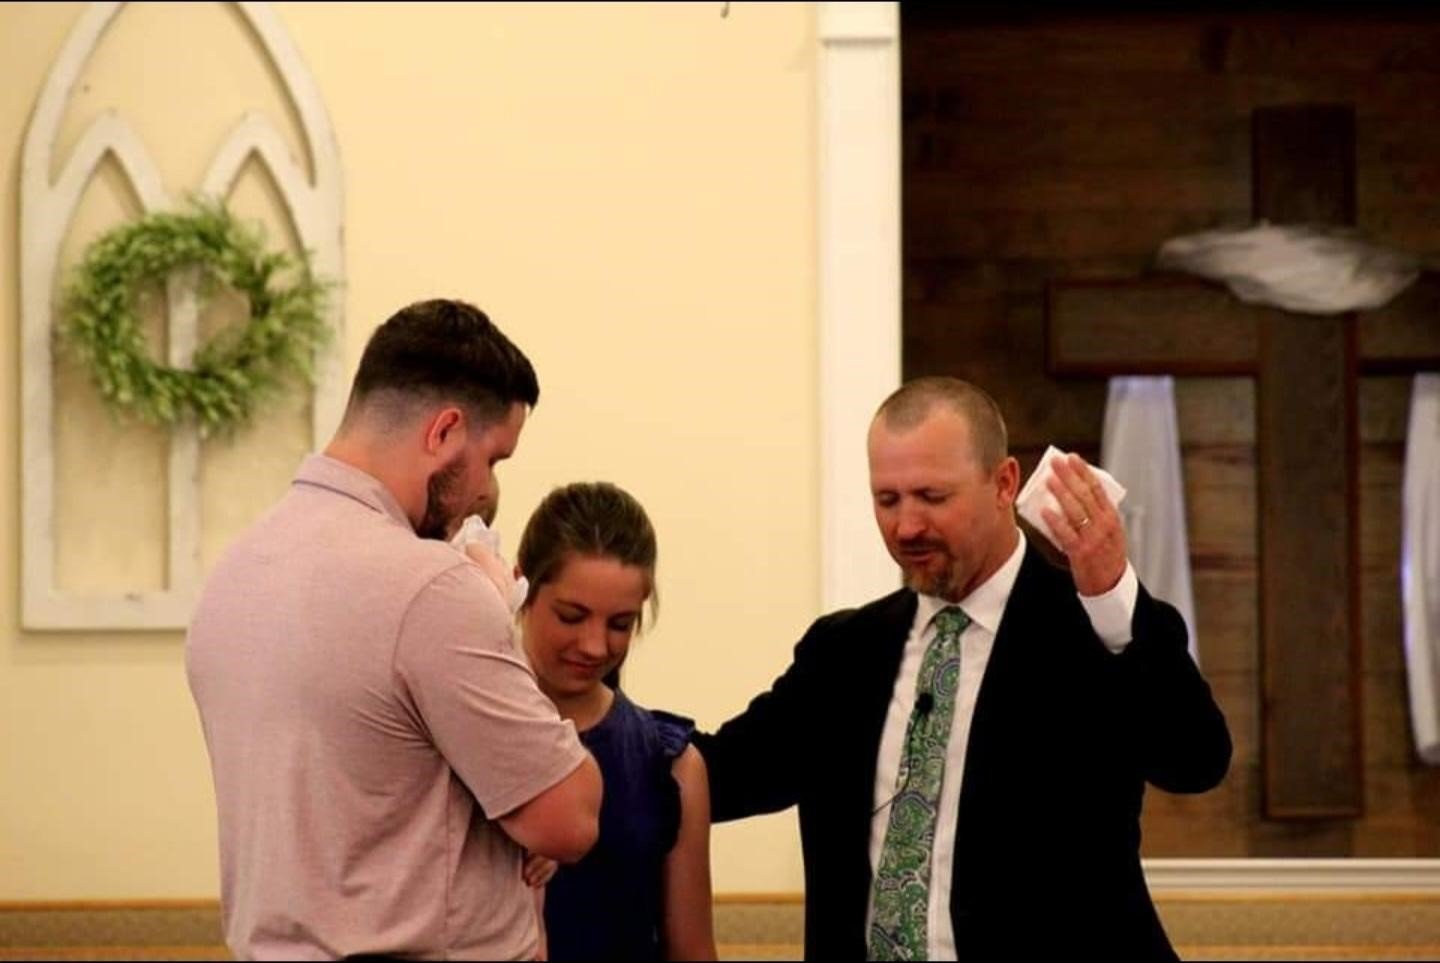 Pastor Kevin Geter, right, prays with new parents during a baby dedication at Ephesus Baptist Church in Ephesus, Ga. The congregation is growing in every way, including, in this case, with a new birth.